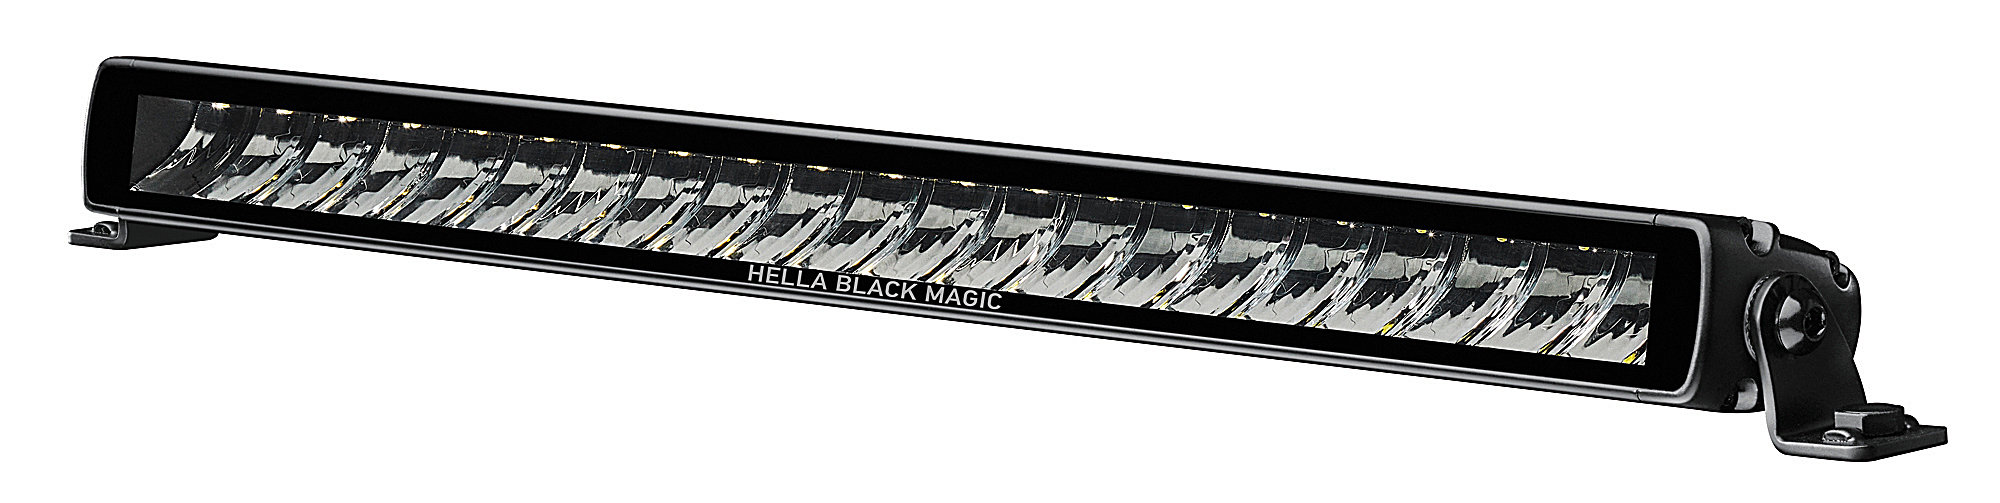 https://www.quadratec.com/sites/default/files/styles/product_zoomed/public/product_images/hella-black-magic-20-inch-thin-light-bar-driving-358176301-tabletop-main.jpg